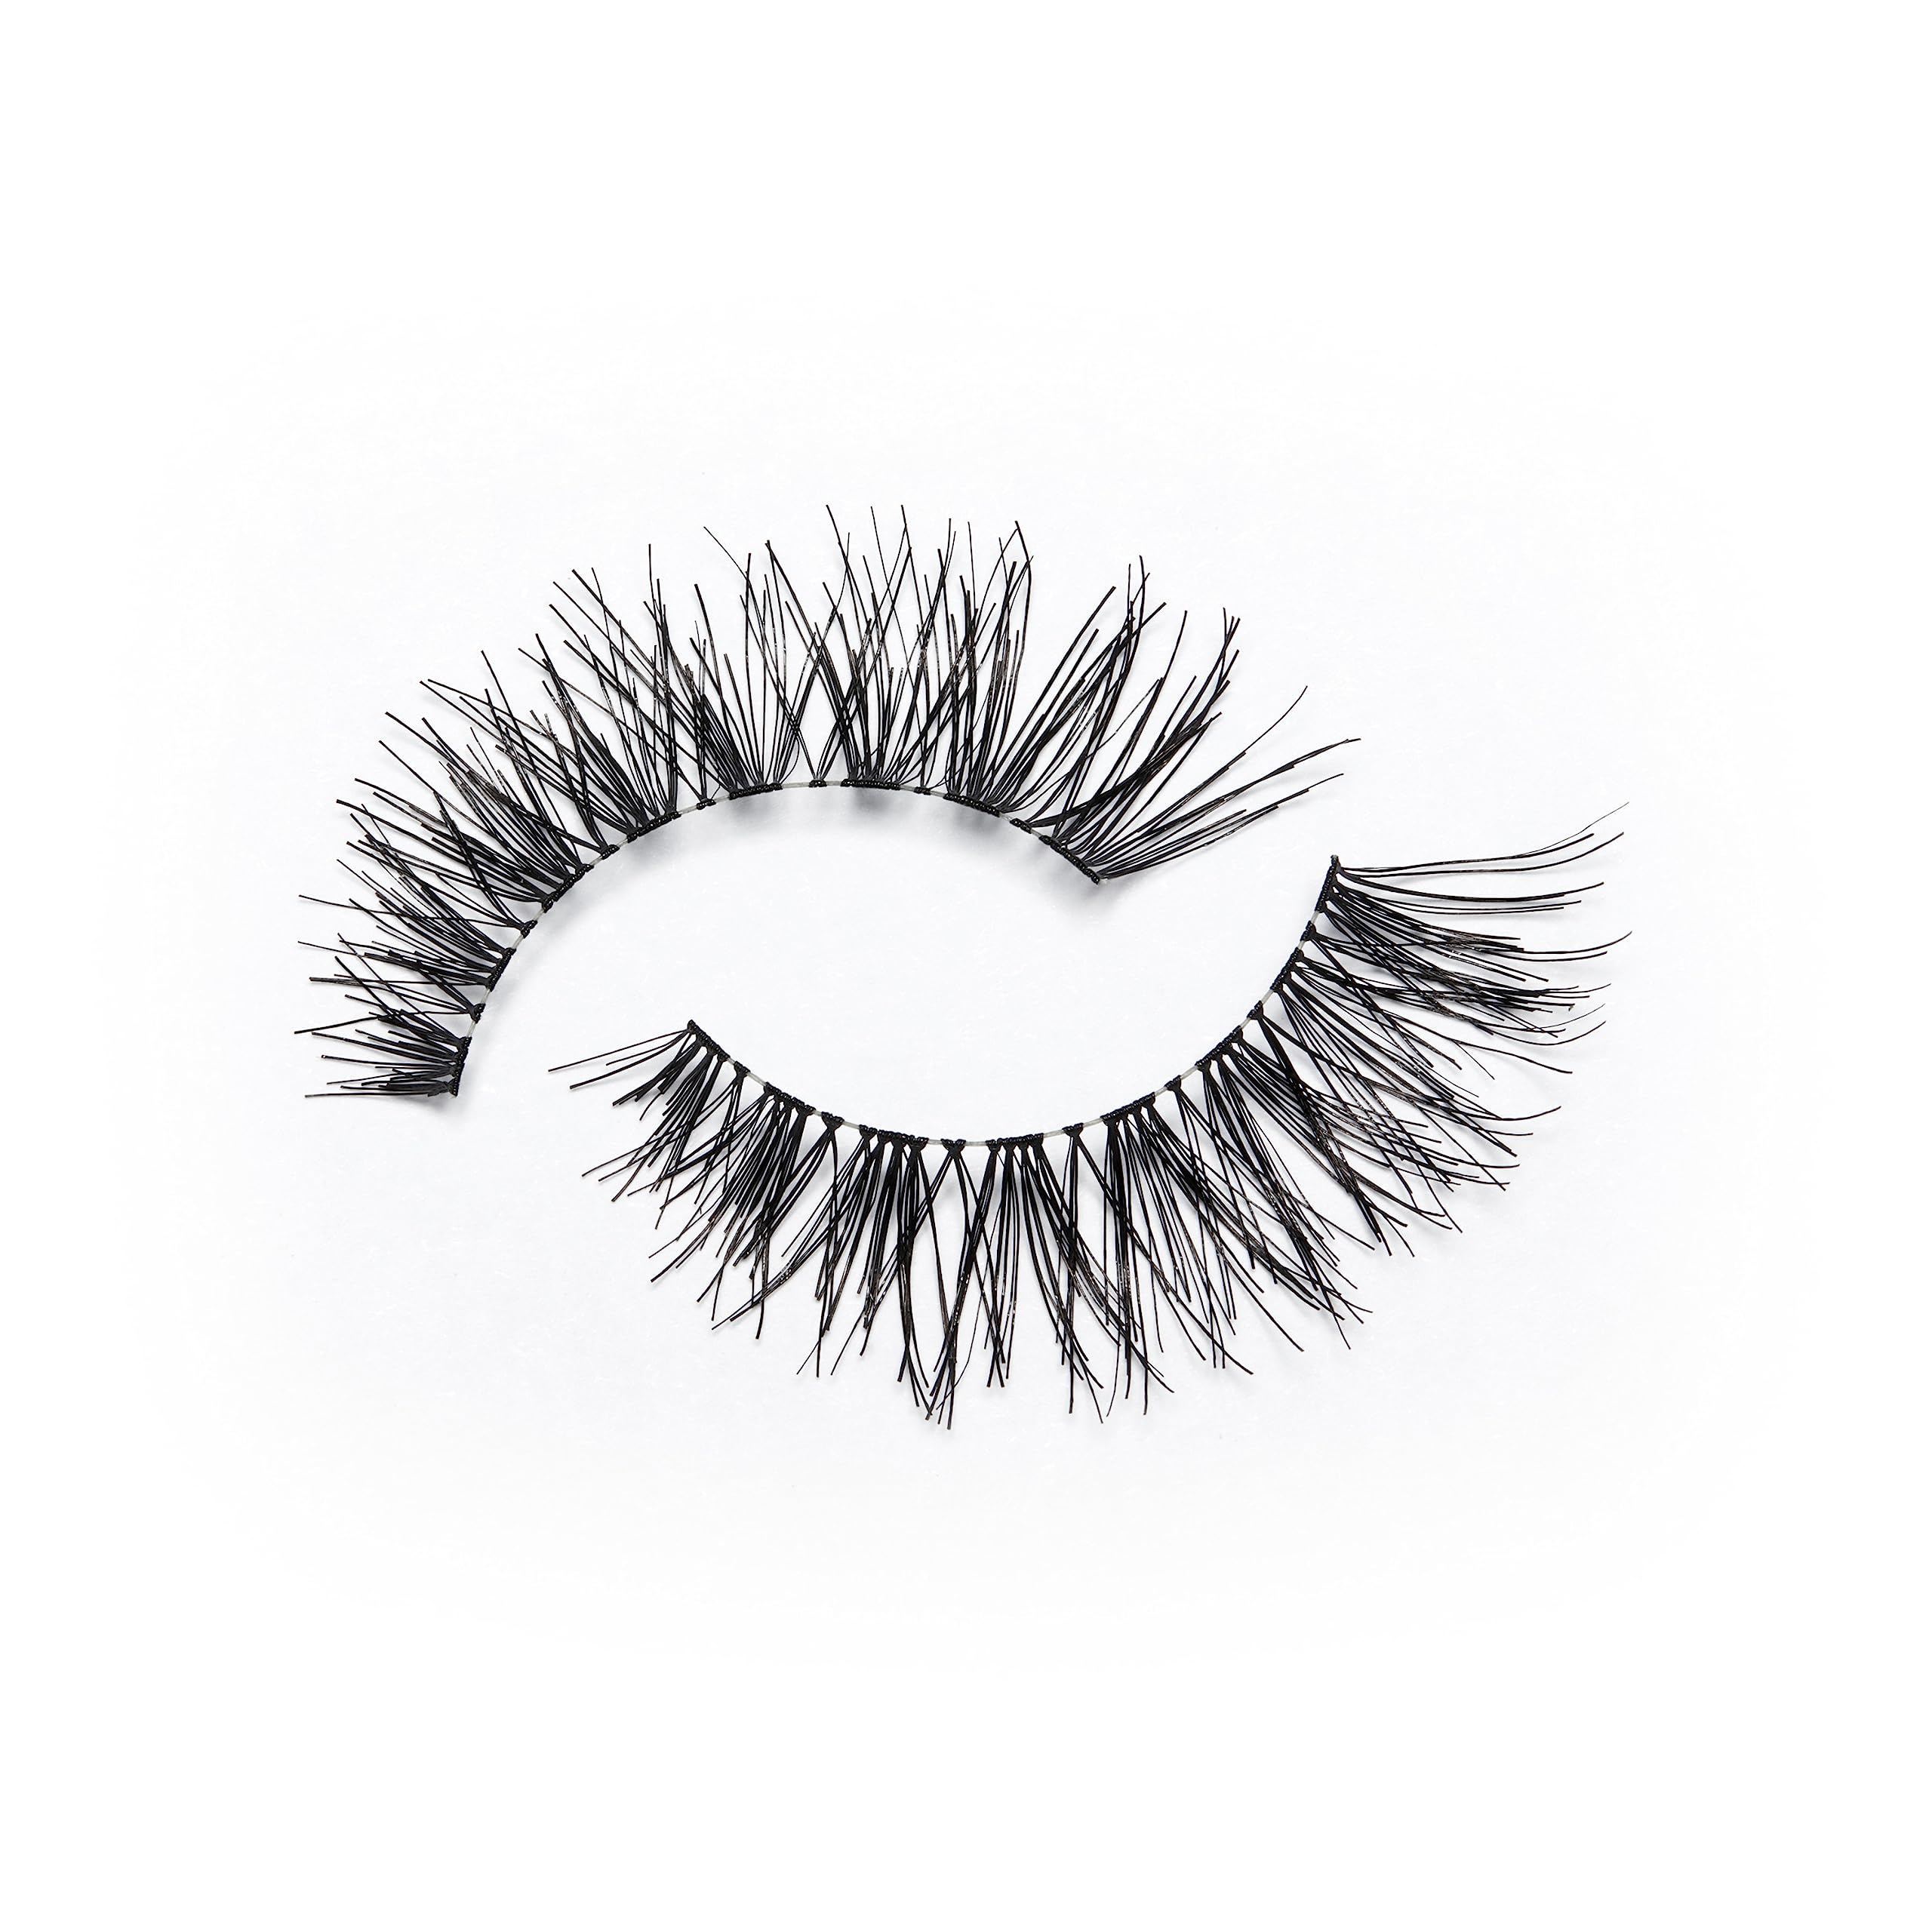 Eylure Texture False Lash, Style No. 117, Reusable, Adhesive Included, 3 Pair